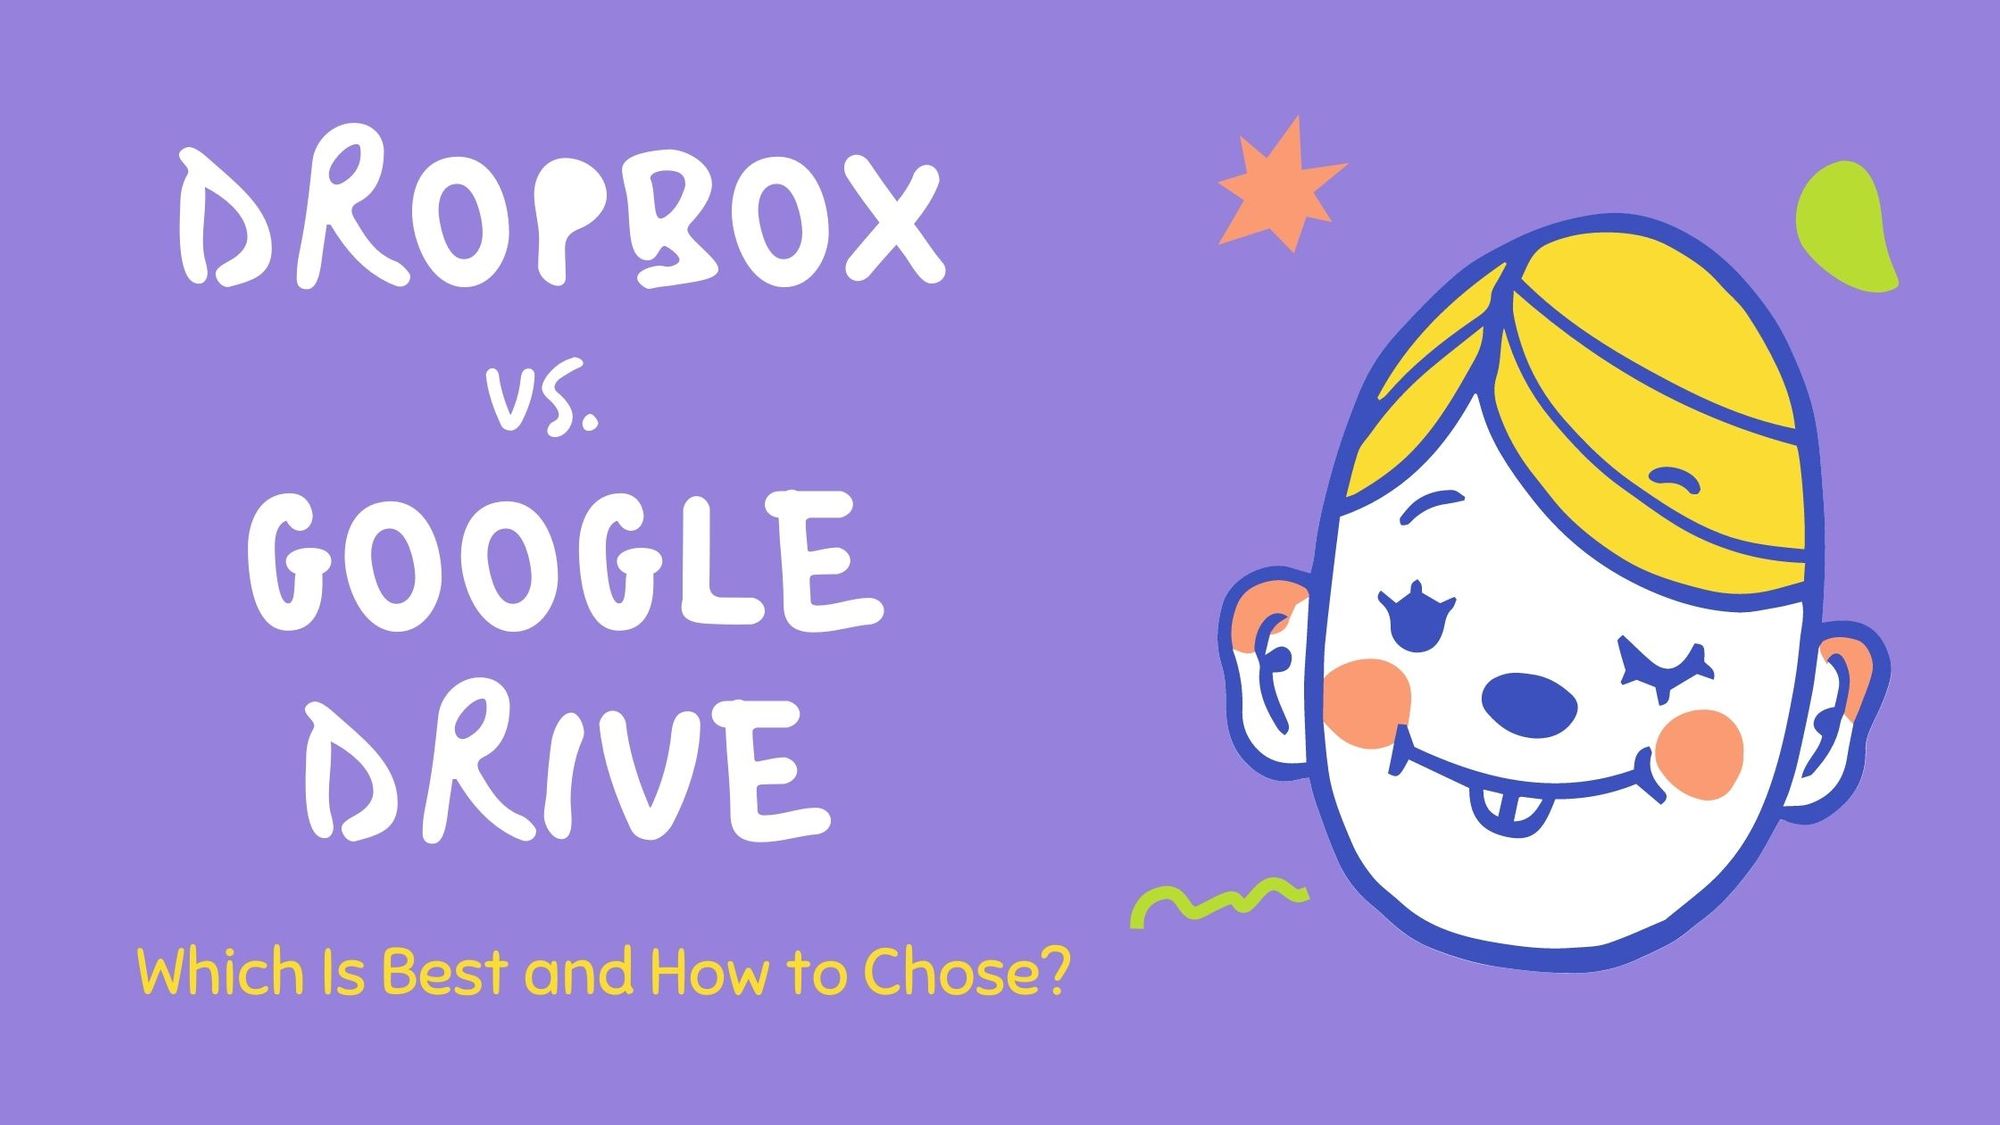 Dropbox Vs. Google Drive - Which is Best and What You Need to Know